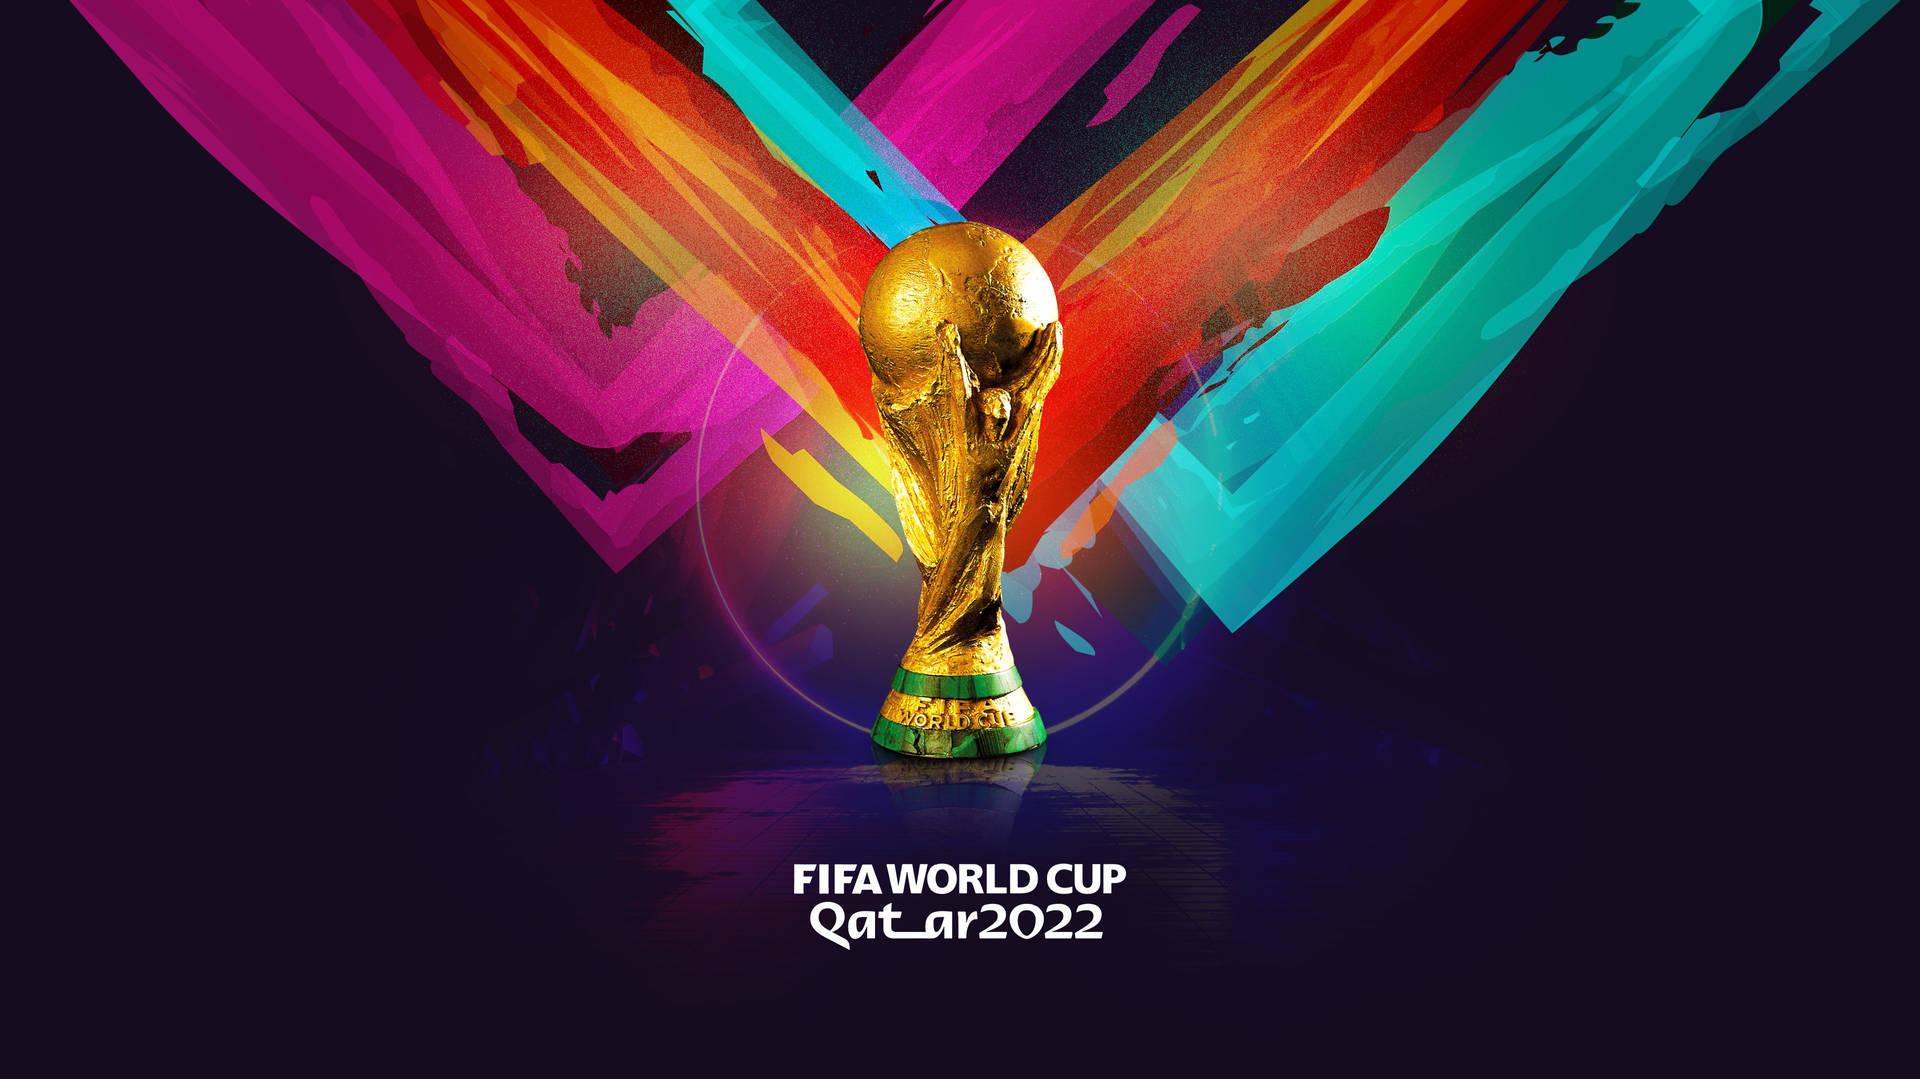 Download Colorful Vector Fifa World Cup 2022 Wallpaper